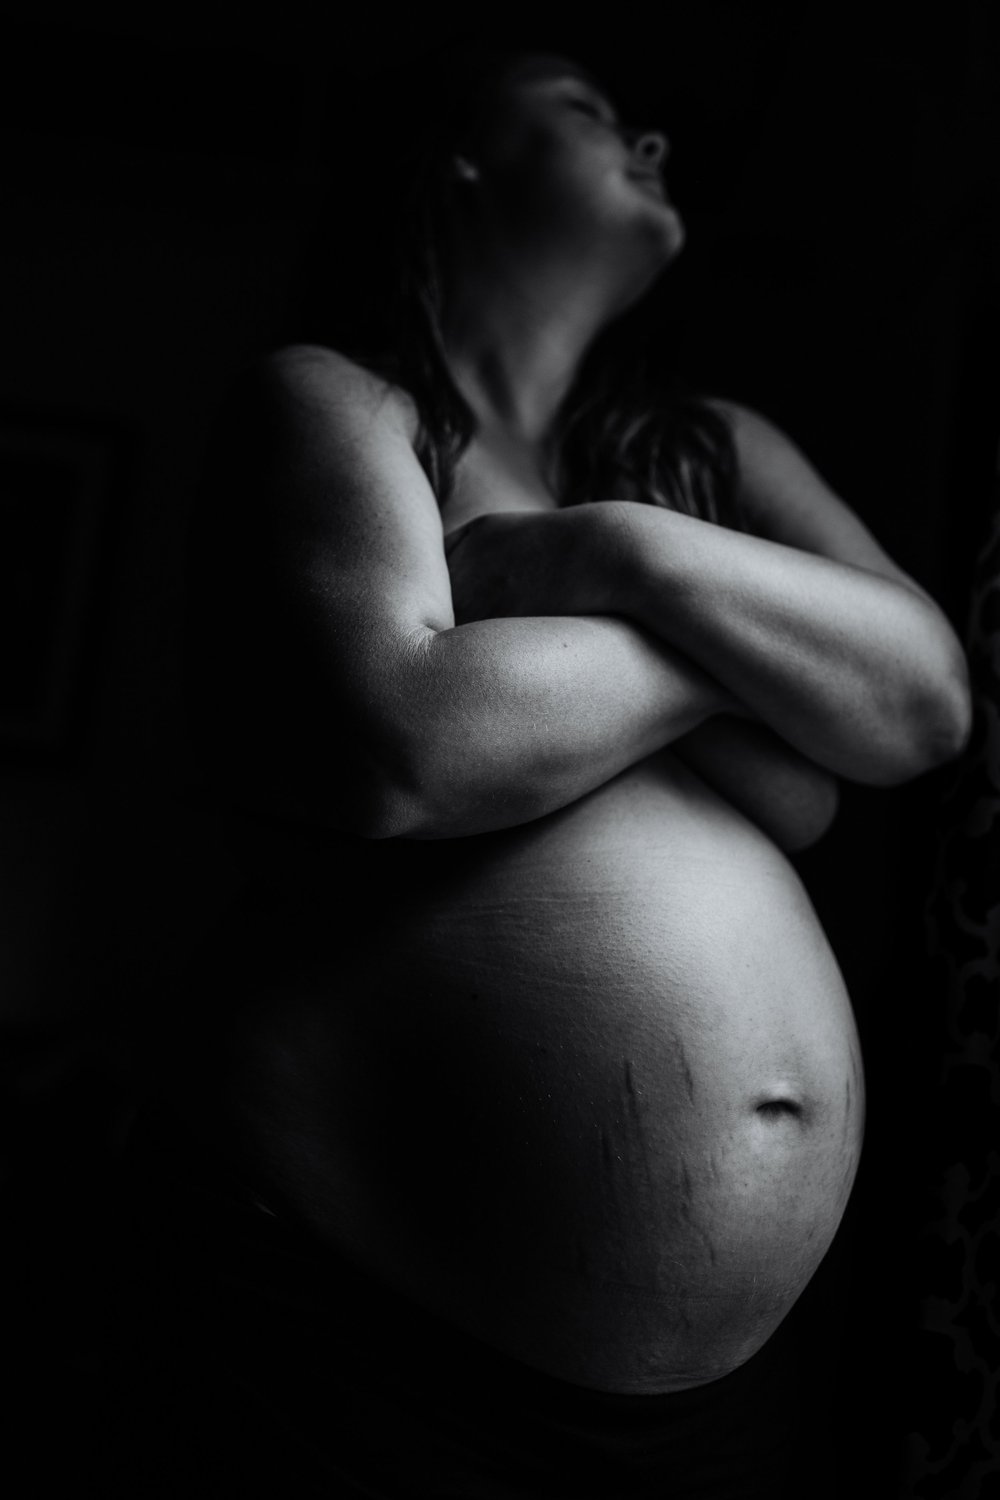 mother stands pregnant showing stretch marks and third trimester belly